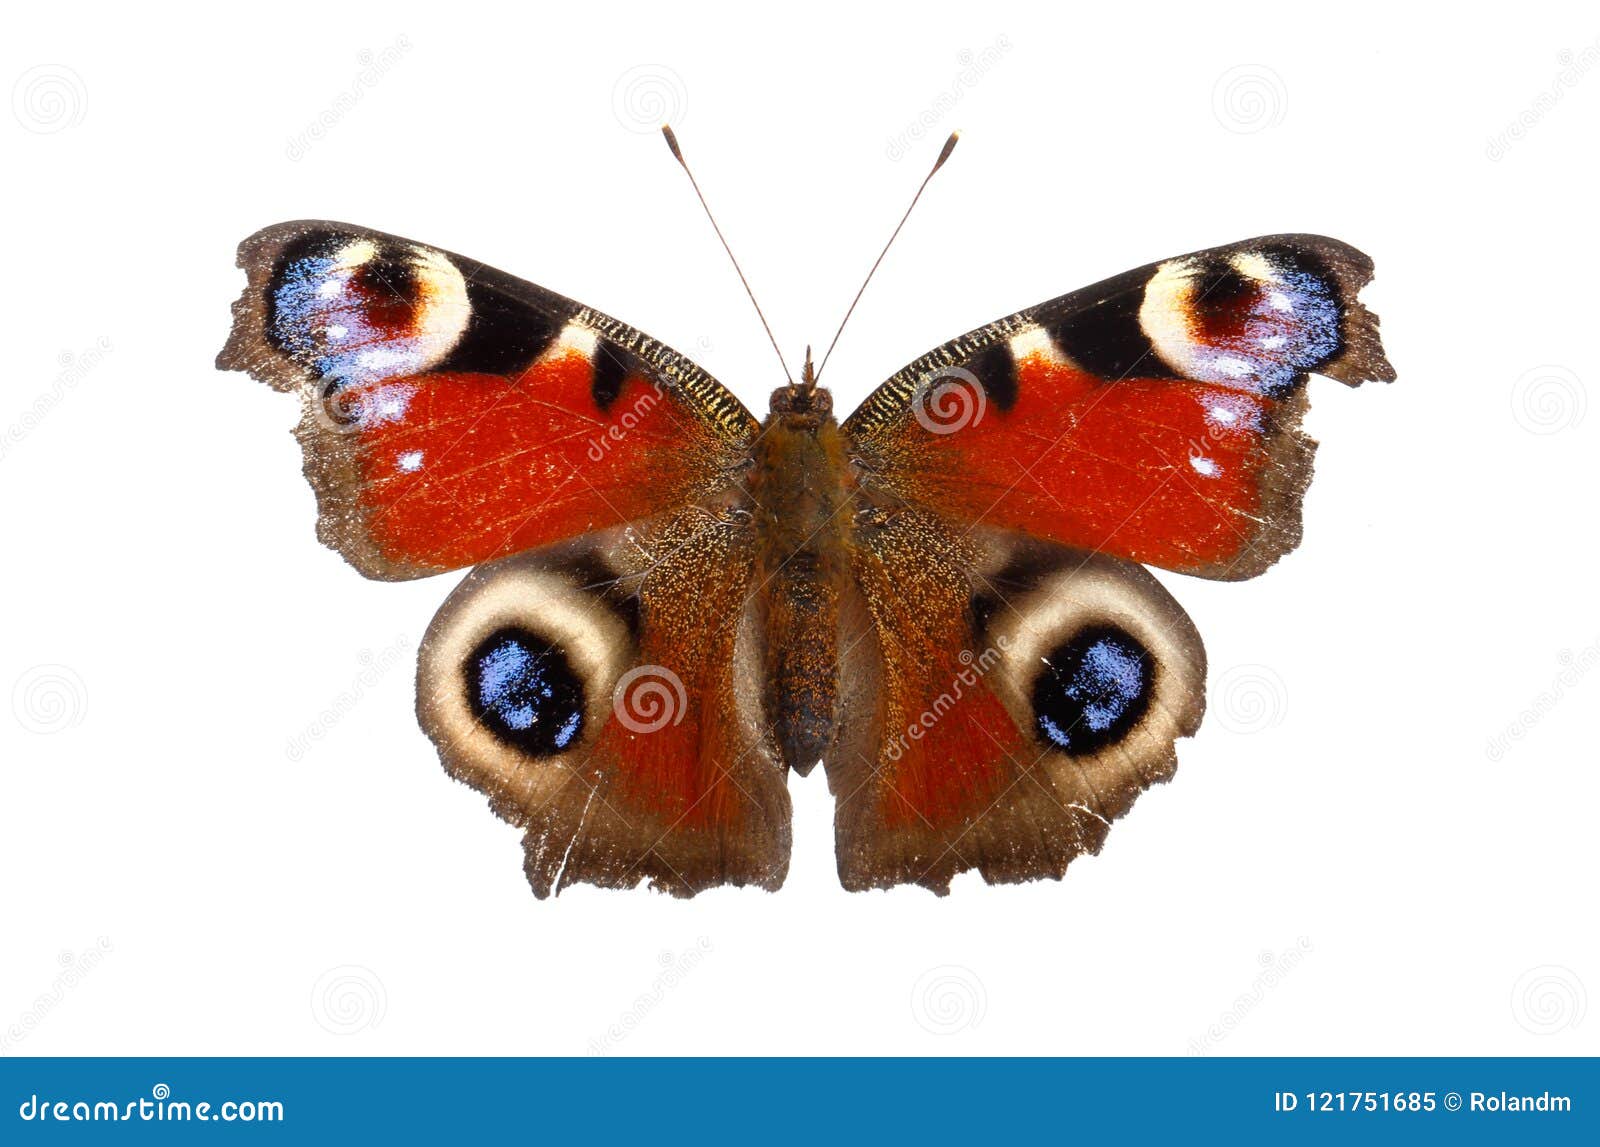 European peacock butterfly stock image. Image of wings - 121751685